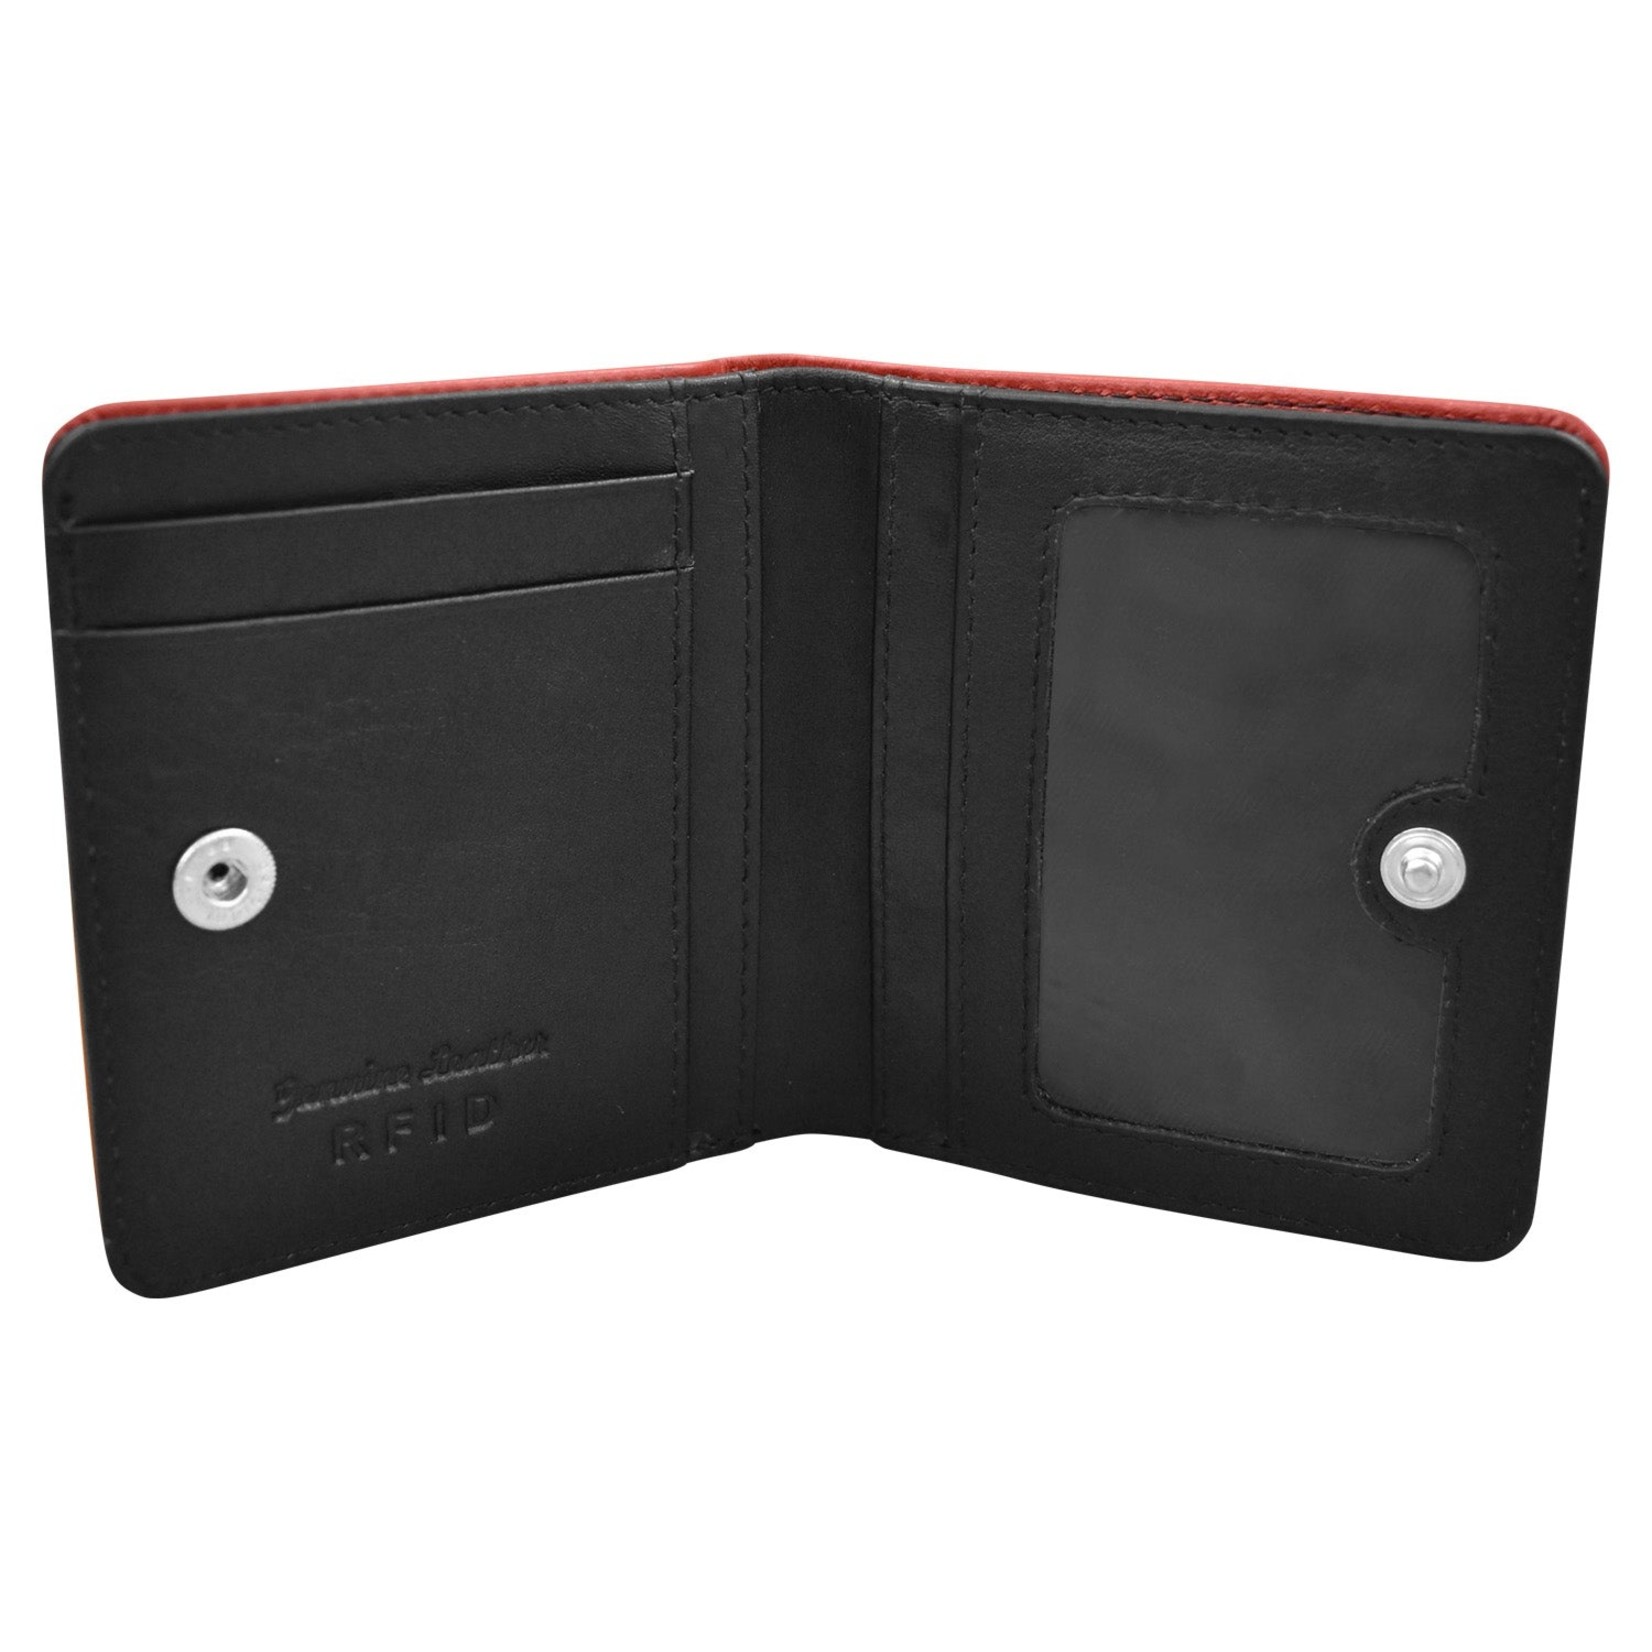 Leather Handbags and Accessories 7831 Red/Black - RFID Mini Wallet Two Toned